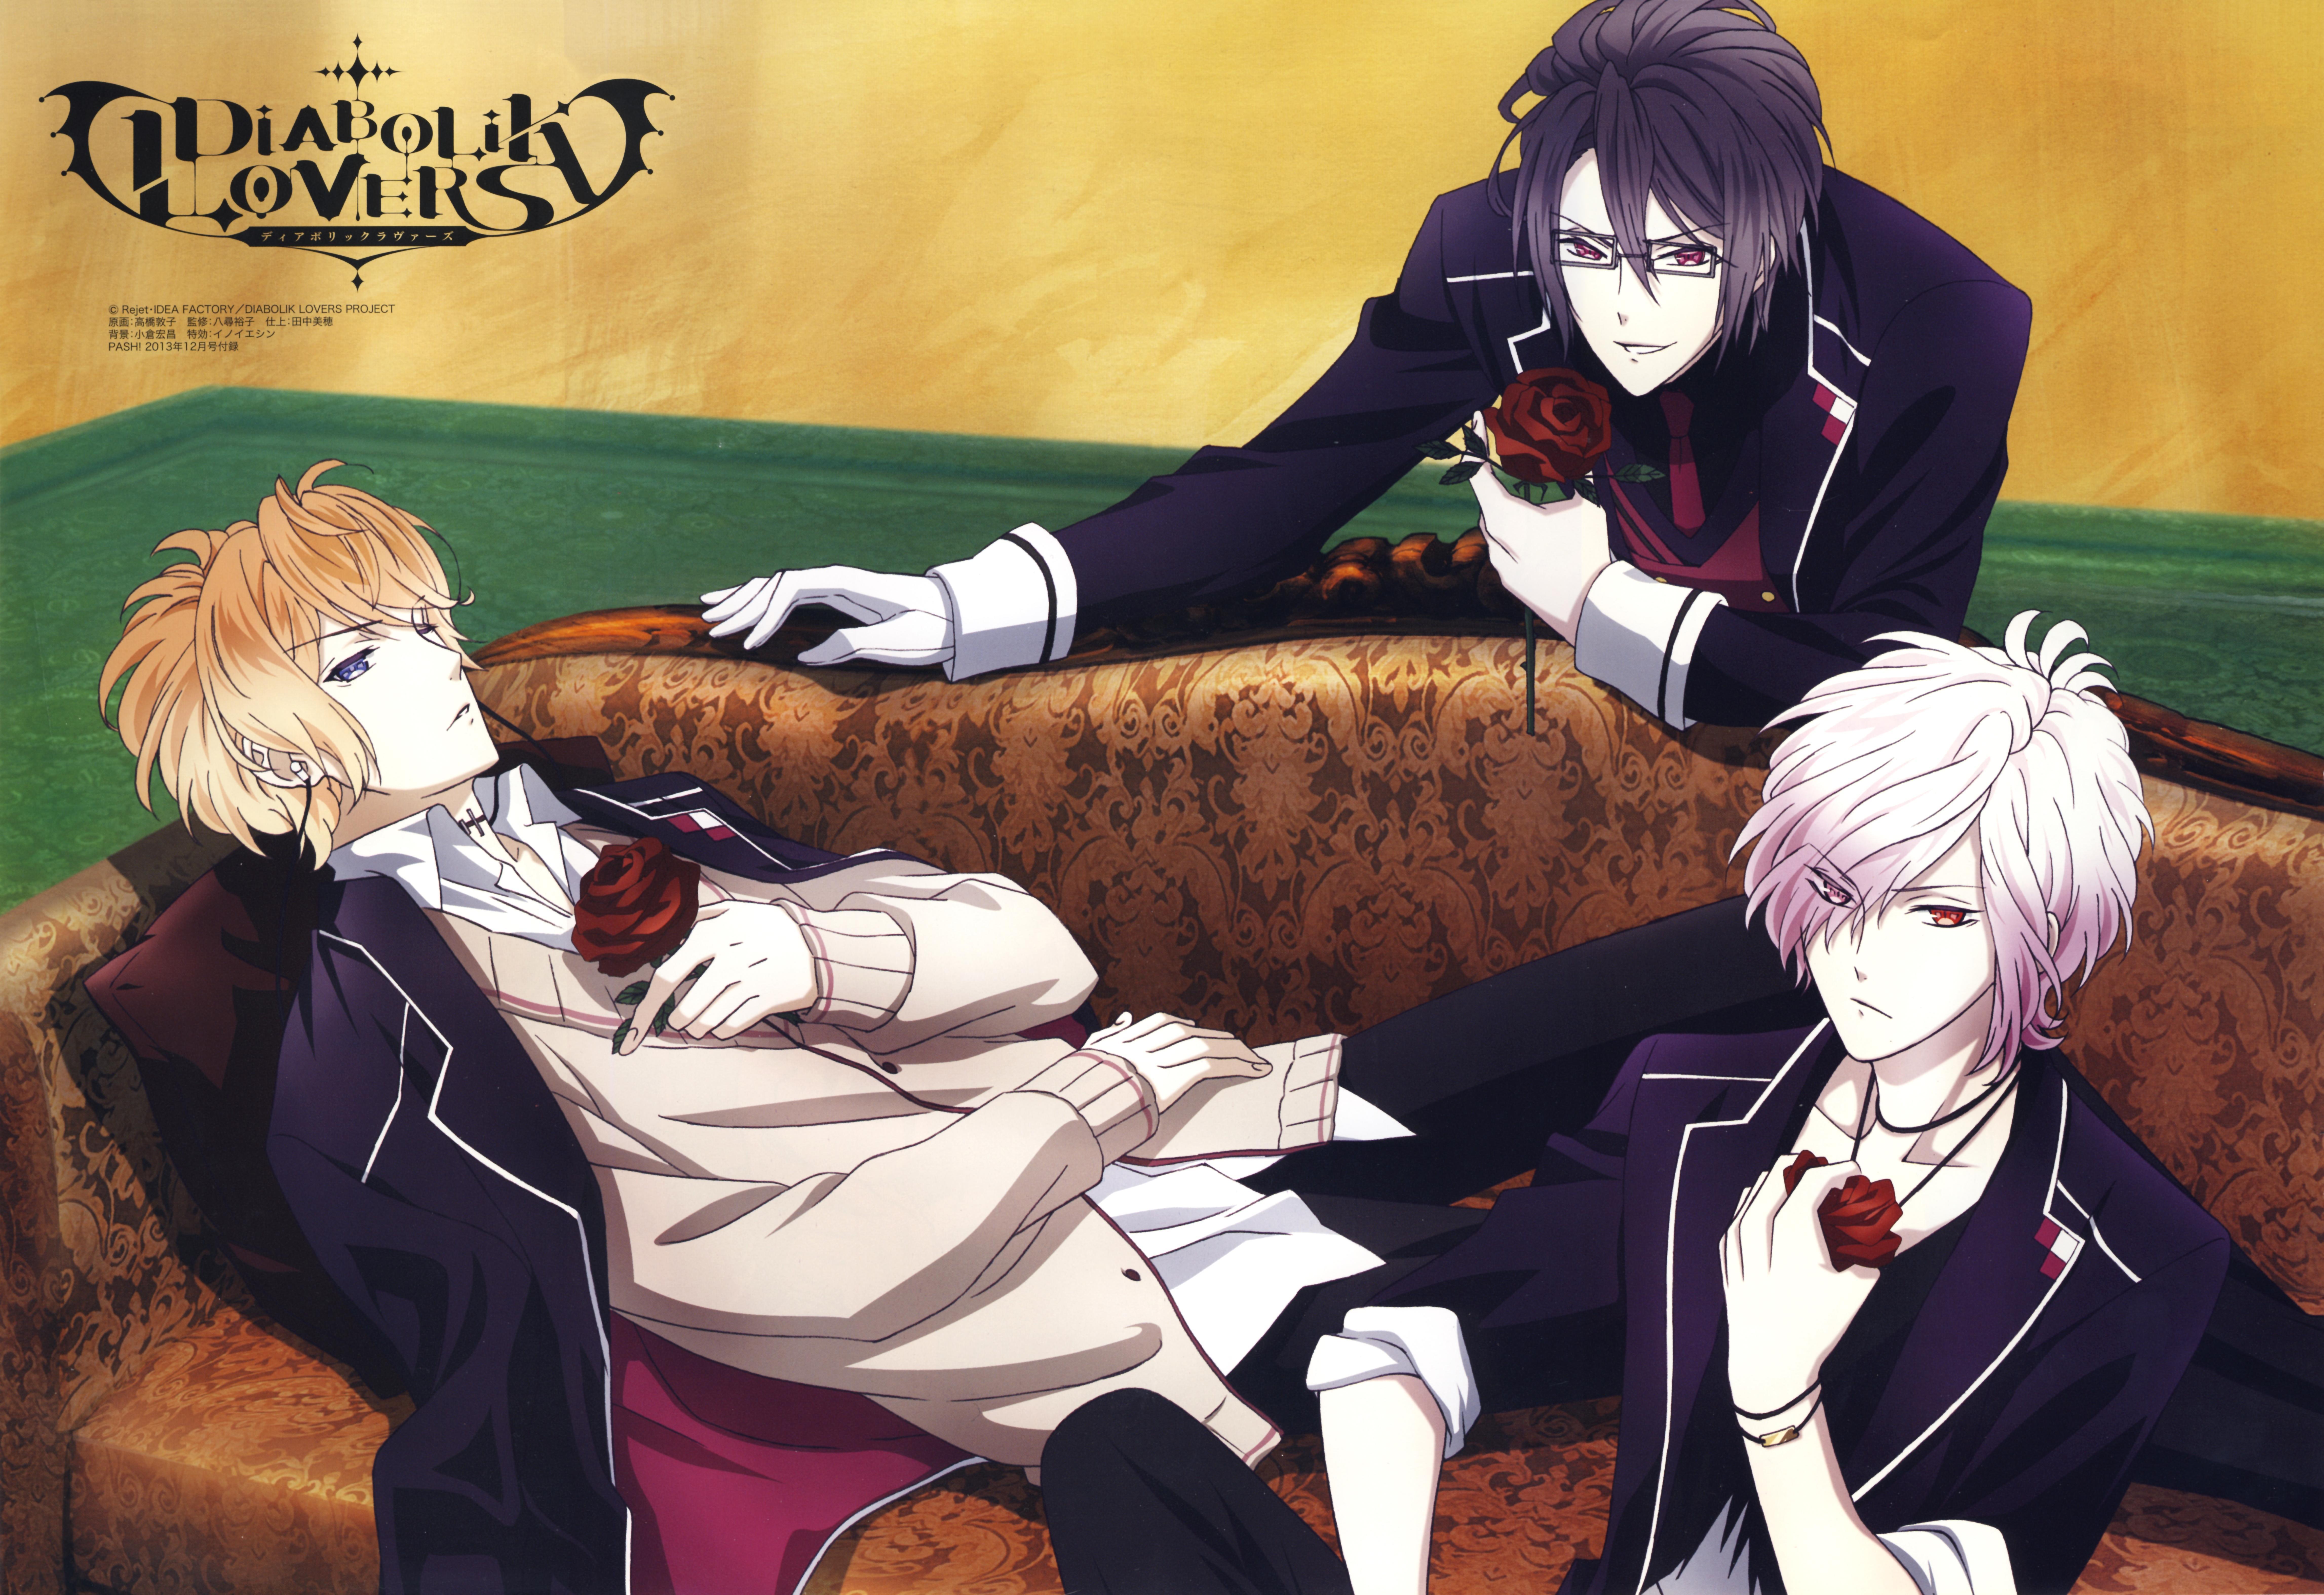 Diabolik Lovers and Scan Gallery